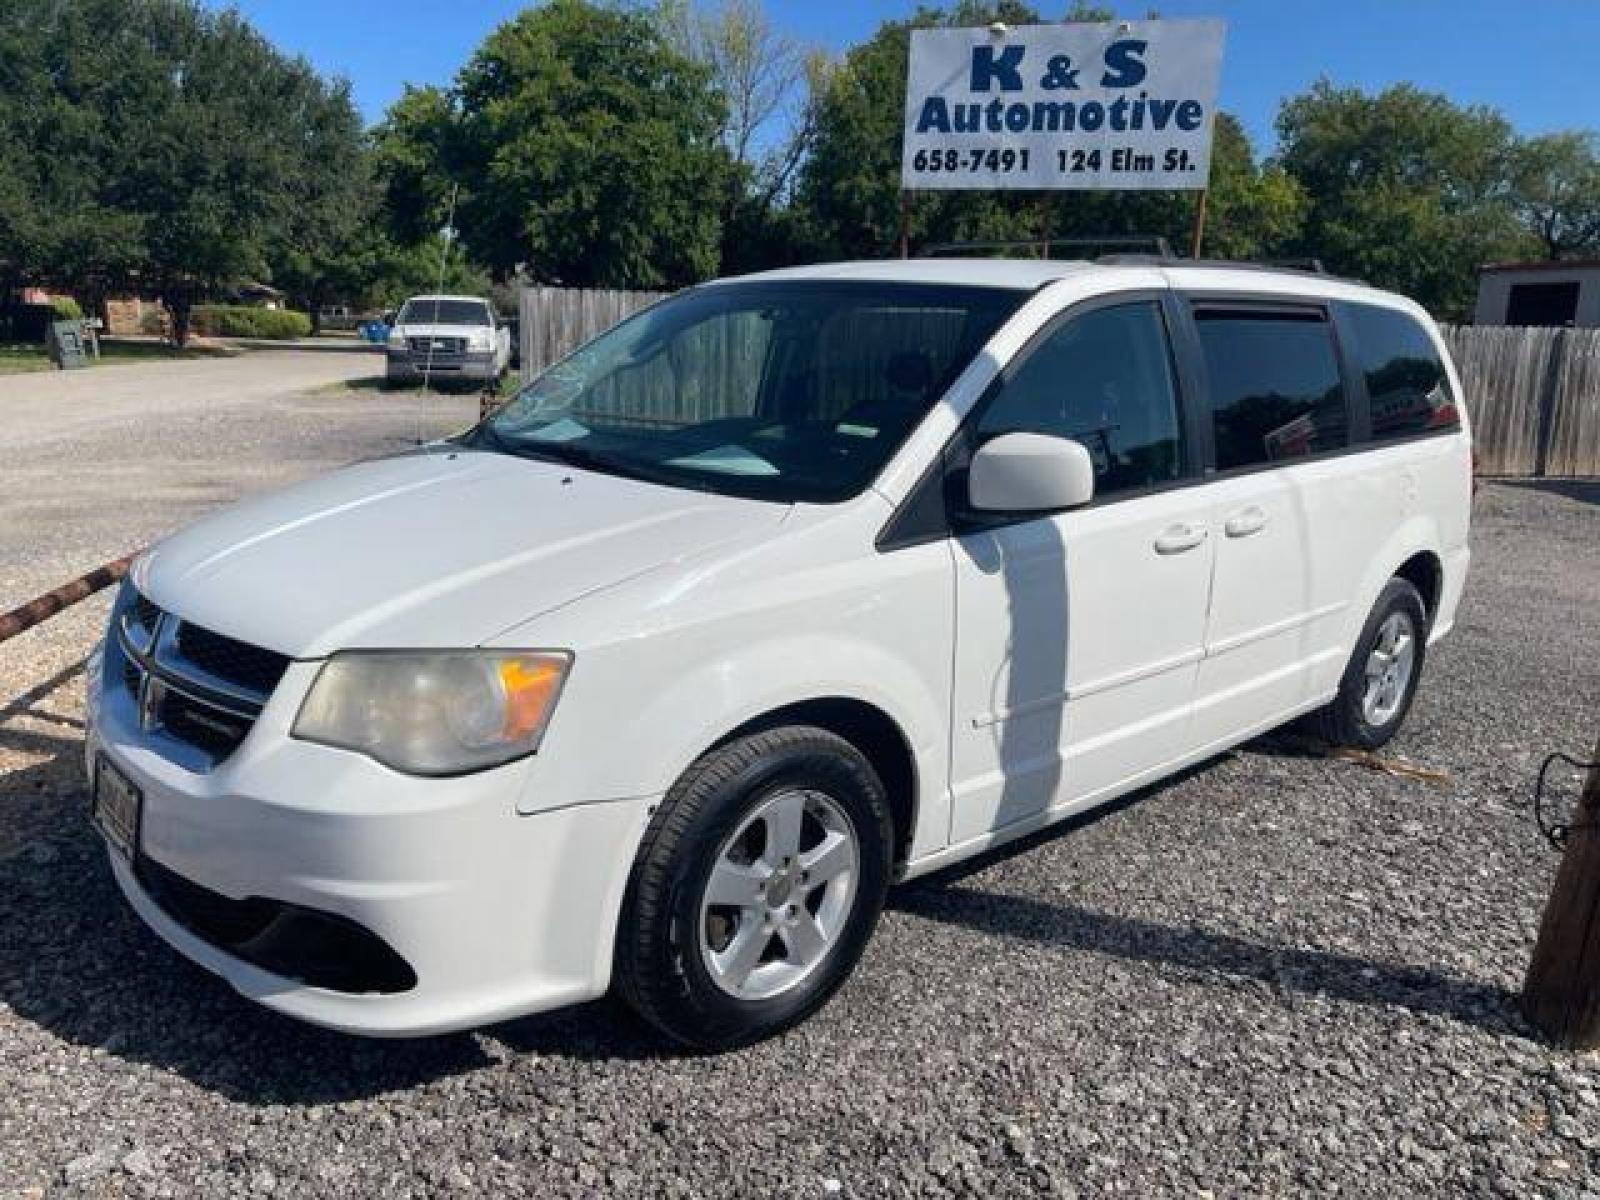 2013 WHITE DODGE GRAND CARAVAN SXT Stow n Go (2C4RDGCGXDR) with an 3.6L engine, Automatic transmission - www.discountautoscibolo.com TEXT QUESTIONS TO 210-900-3118 35 MONTHLY PAYMENTS OF $295 WITH $1895 DOWN AND FINAL ODD PAYMENT OF $273.90 W/FIRST PAYMENT DUE 30 DAYS FROM DATE OF SALE. FEATURES: STOW-N-GO,POWER SLIDING DOORS, 3RD ROW ** NO WARRANTY, SOLD AS IS ** 36 MO'S TERM - Photo #0